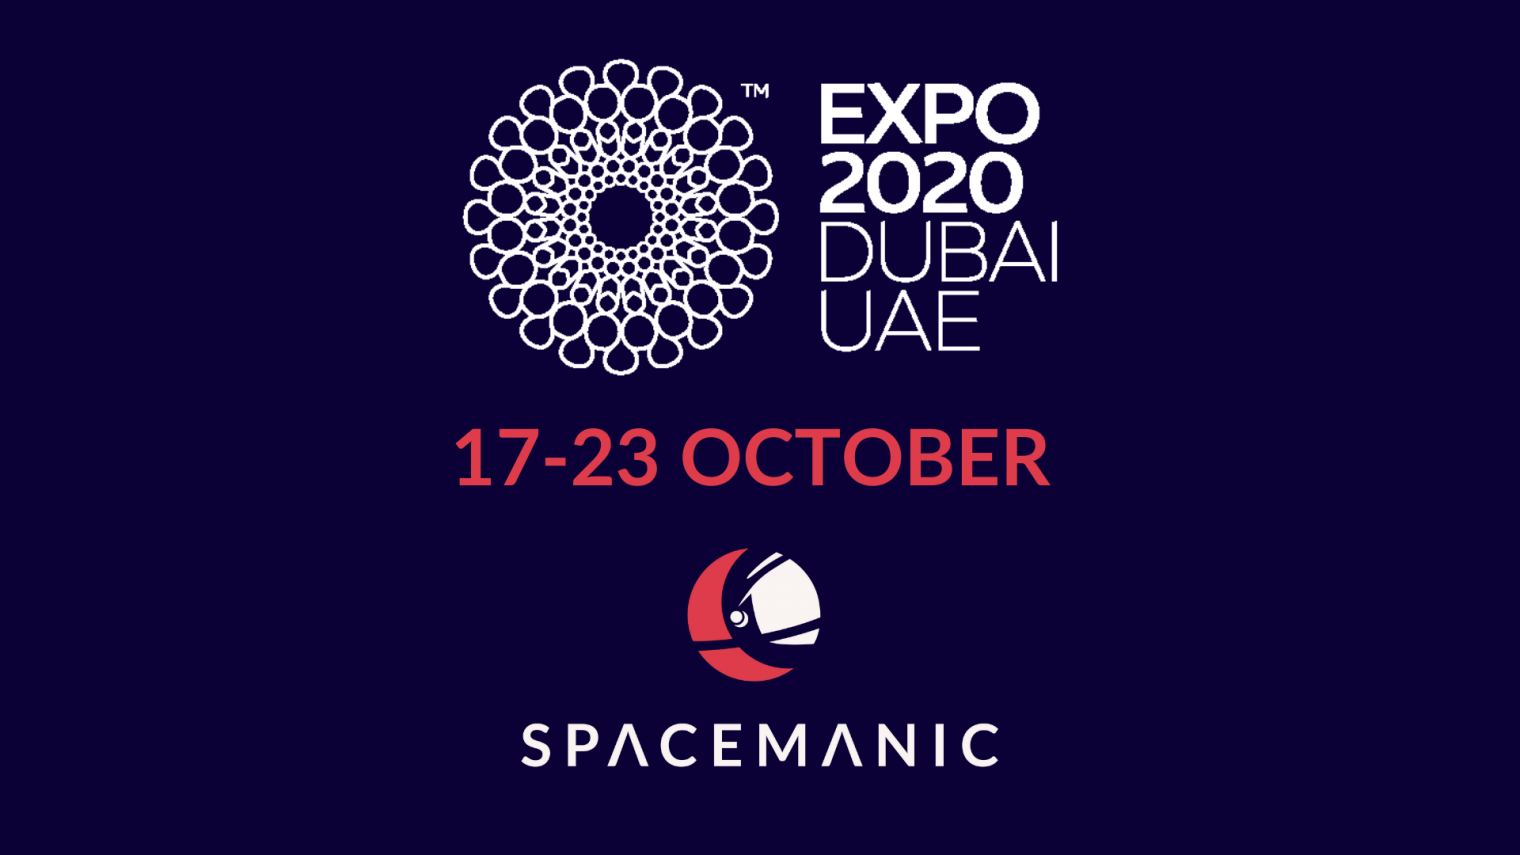 SPACE IS COMING TO DUBAI AND SO ARE WE!